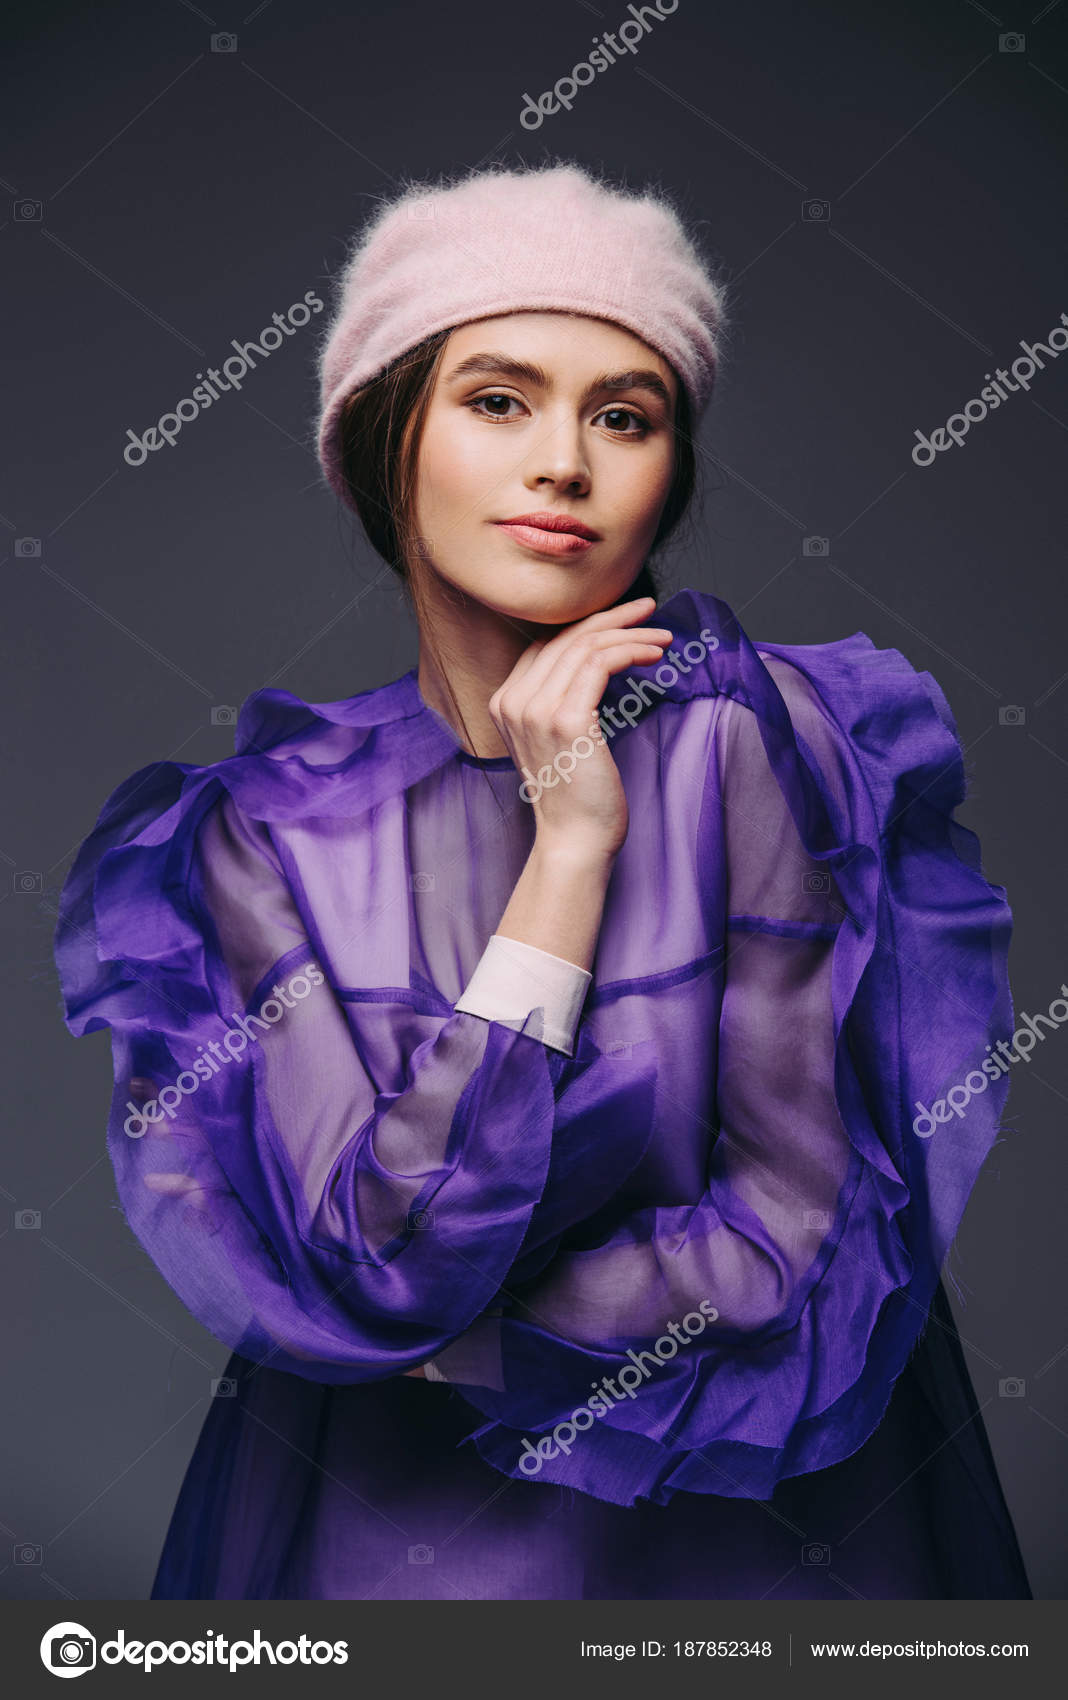 looking for a purple dress